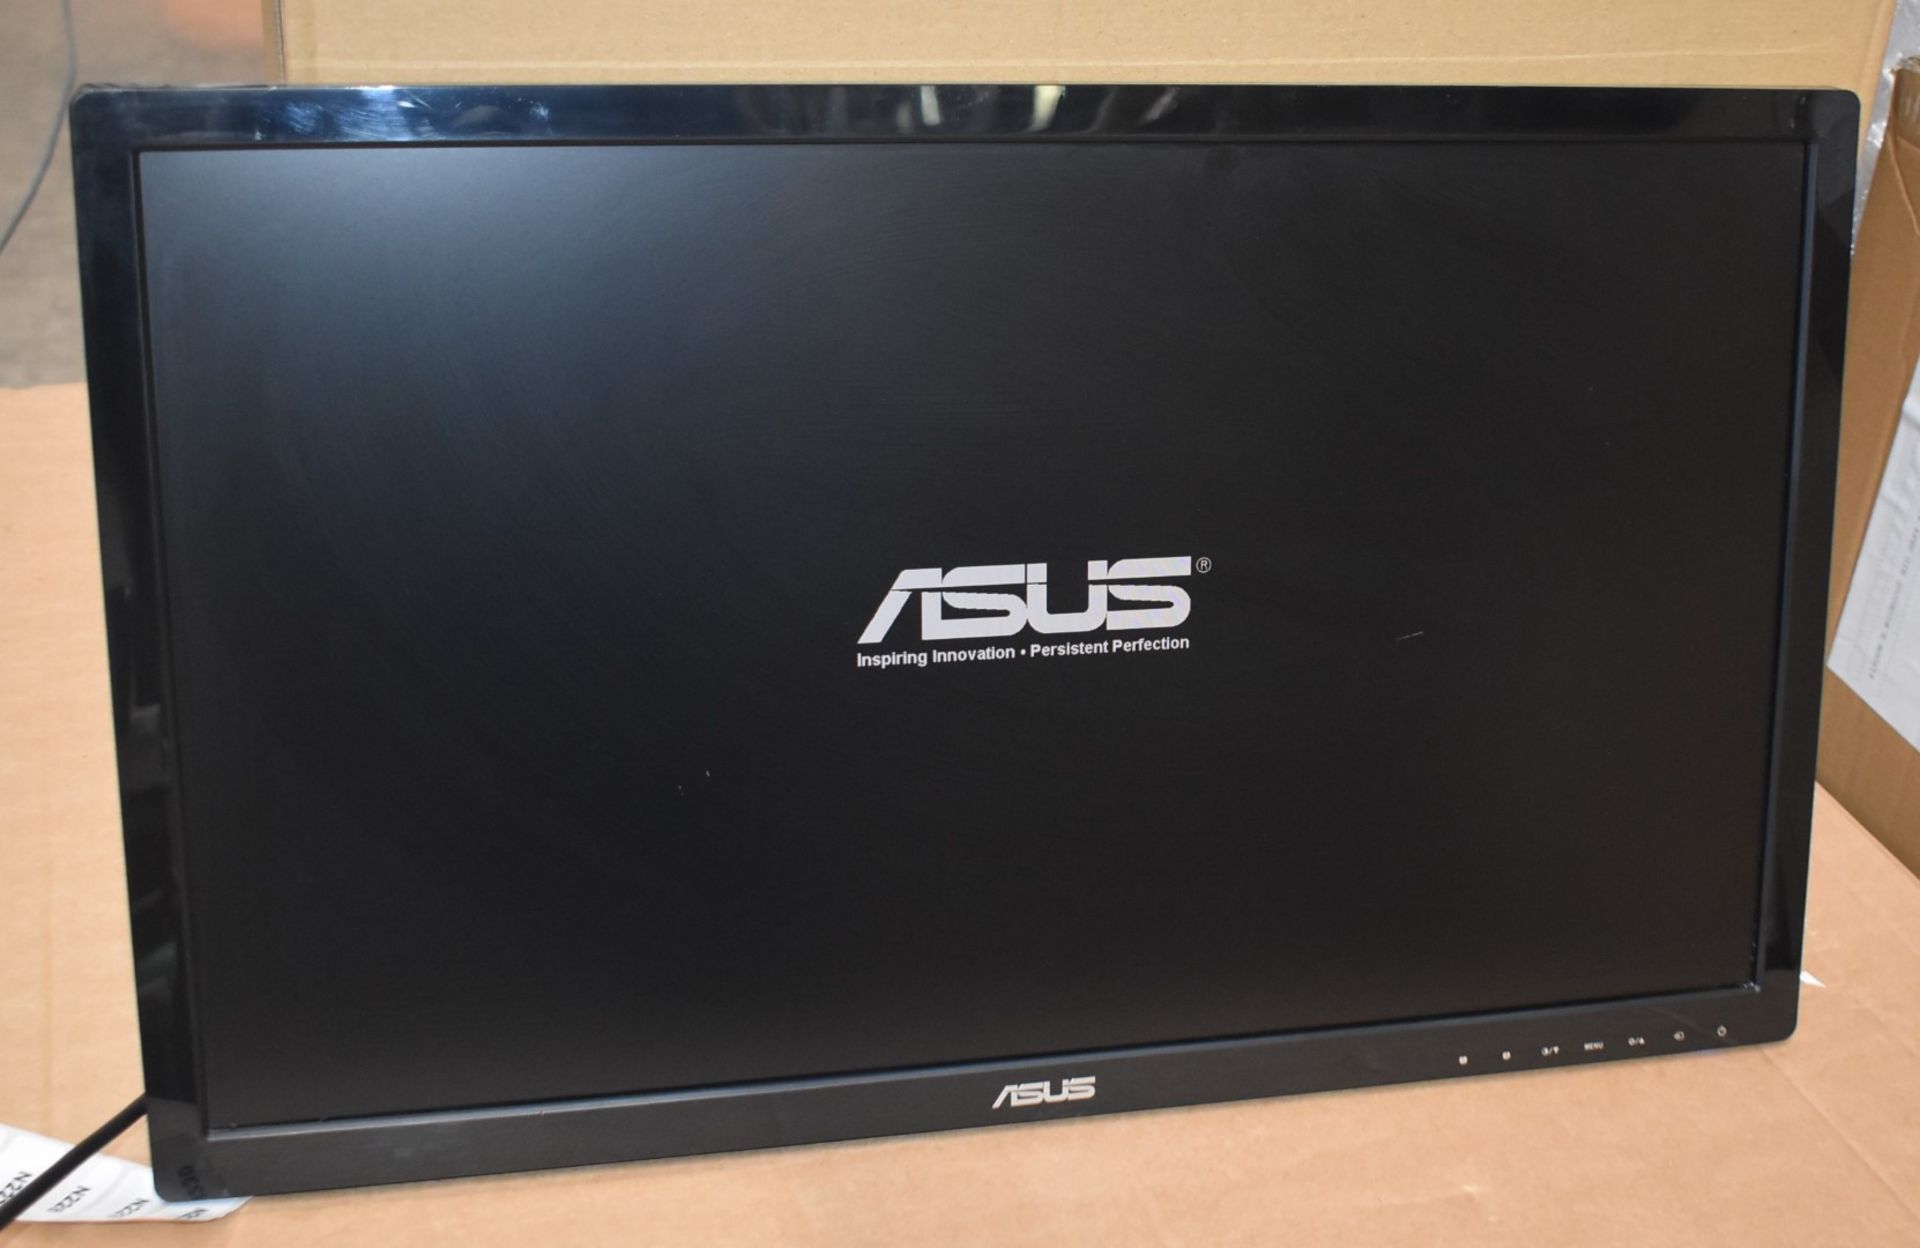 1 x Asus 27 Inch PC Monitor - Model VE276 - Suitable For Wall Mounting - Stand Not Included - Image 2 of 4